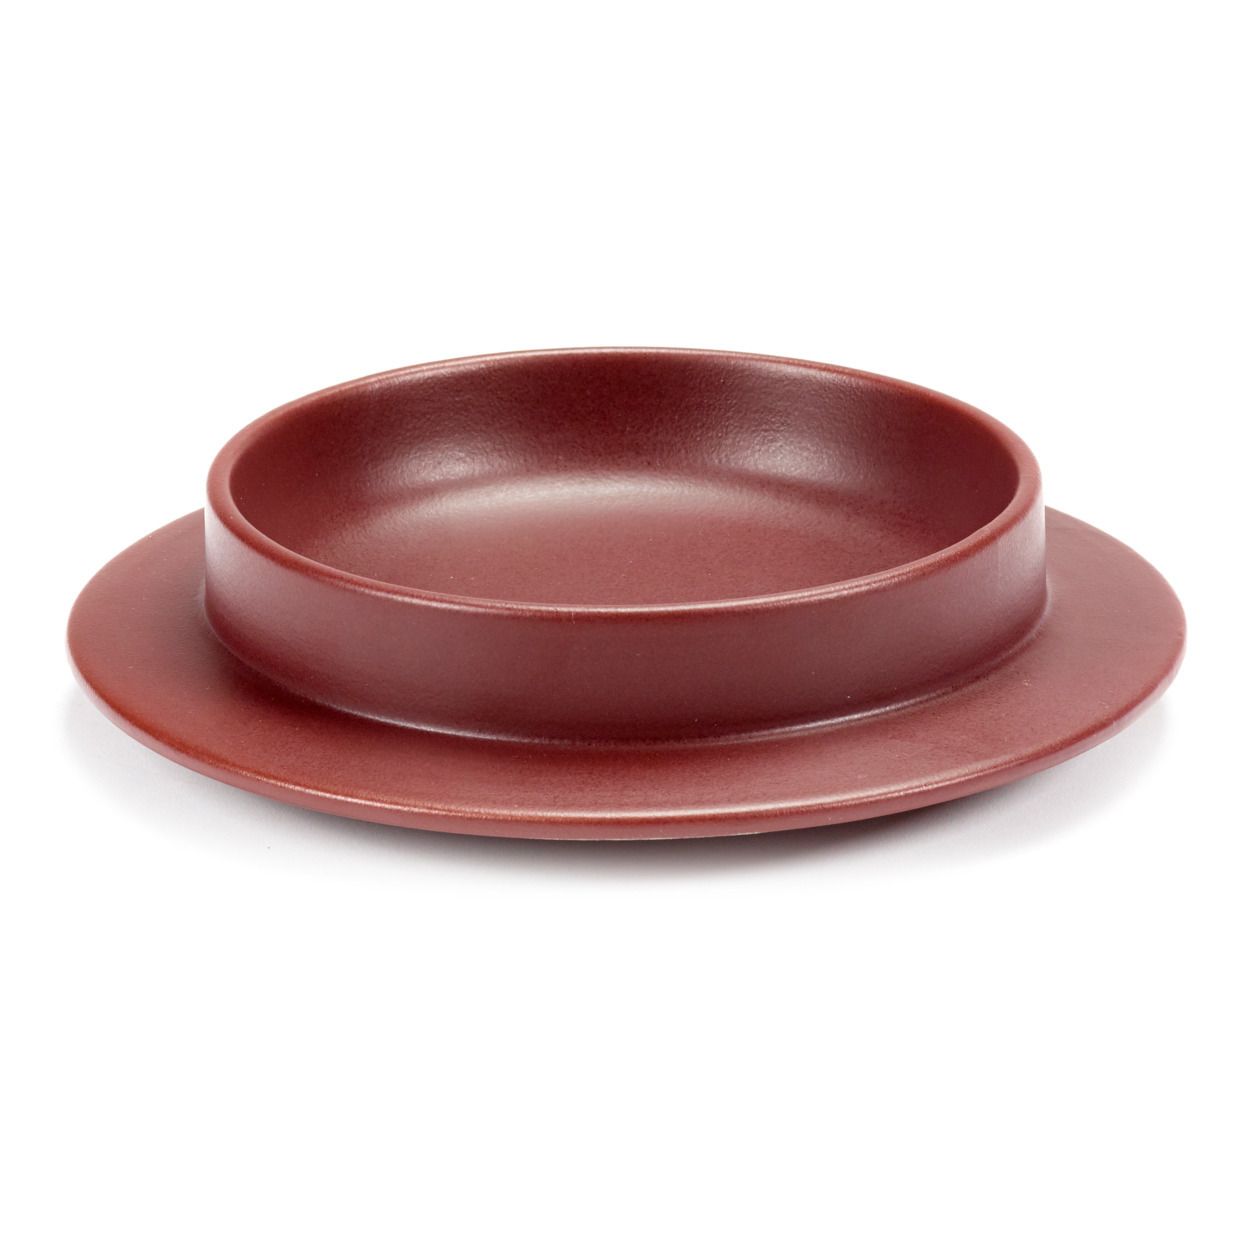 Valerie Objects - Bol Dishes to dishes - Rouge